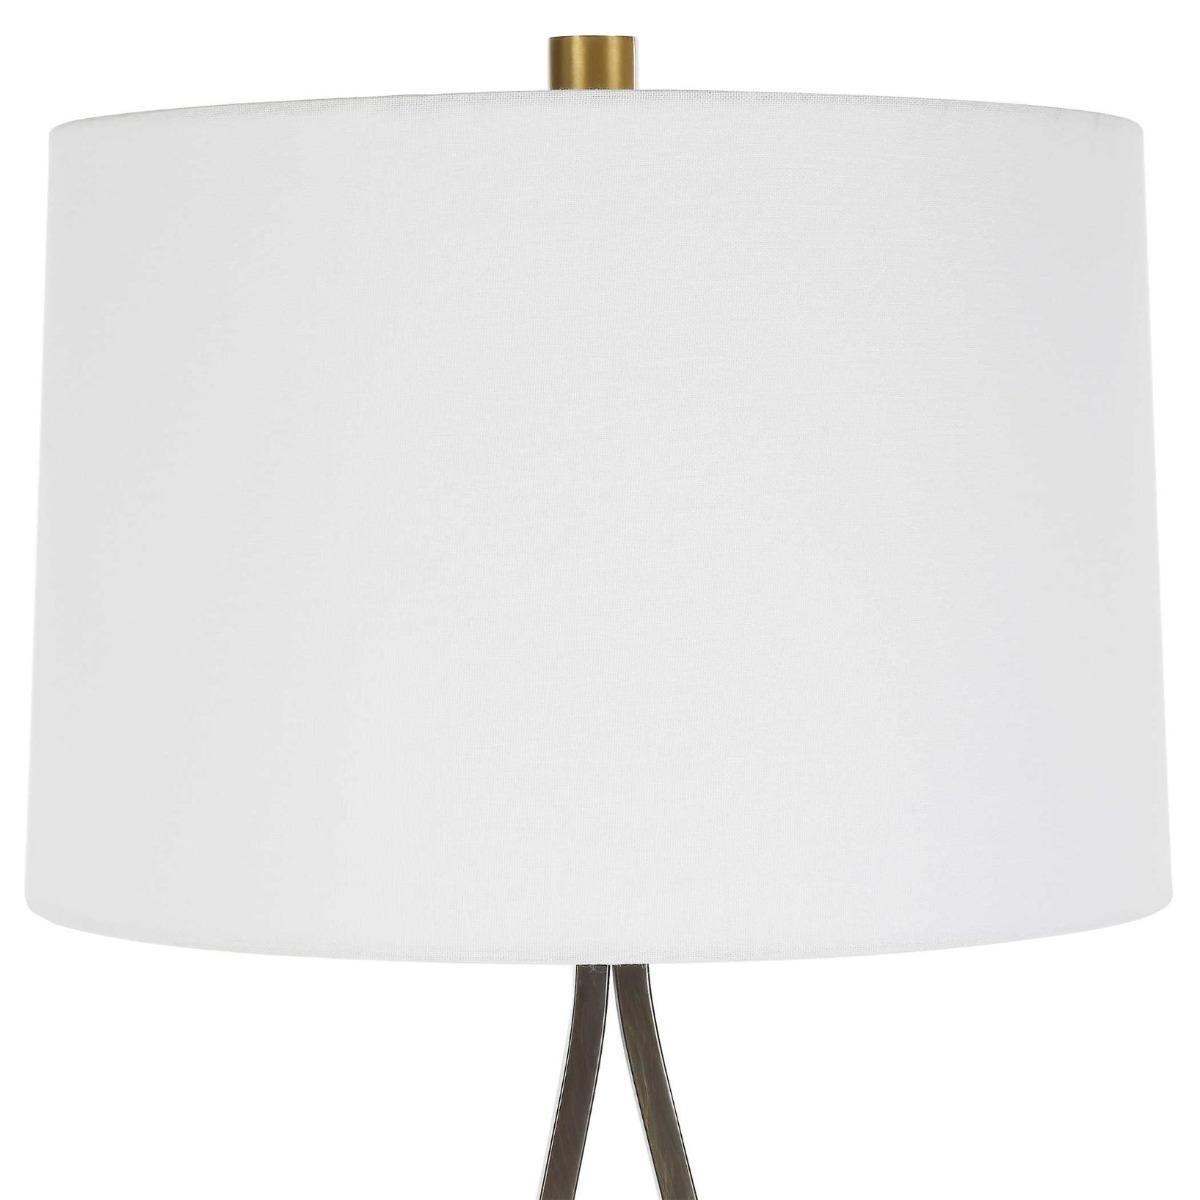 Uttermost Separate Paths Iron Table Lamp